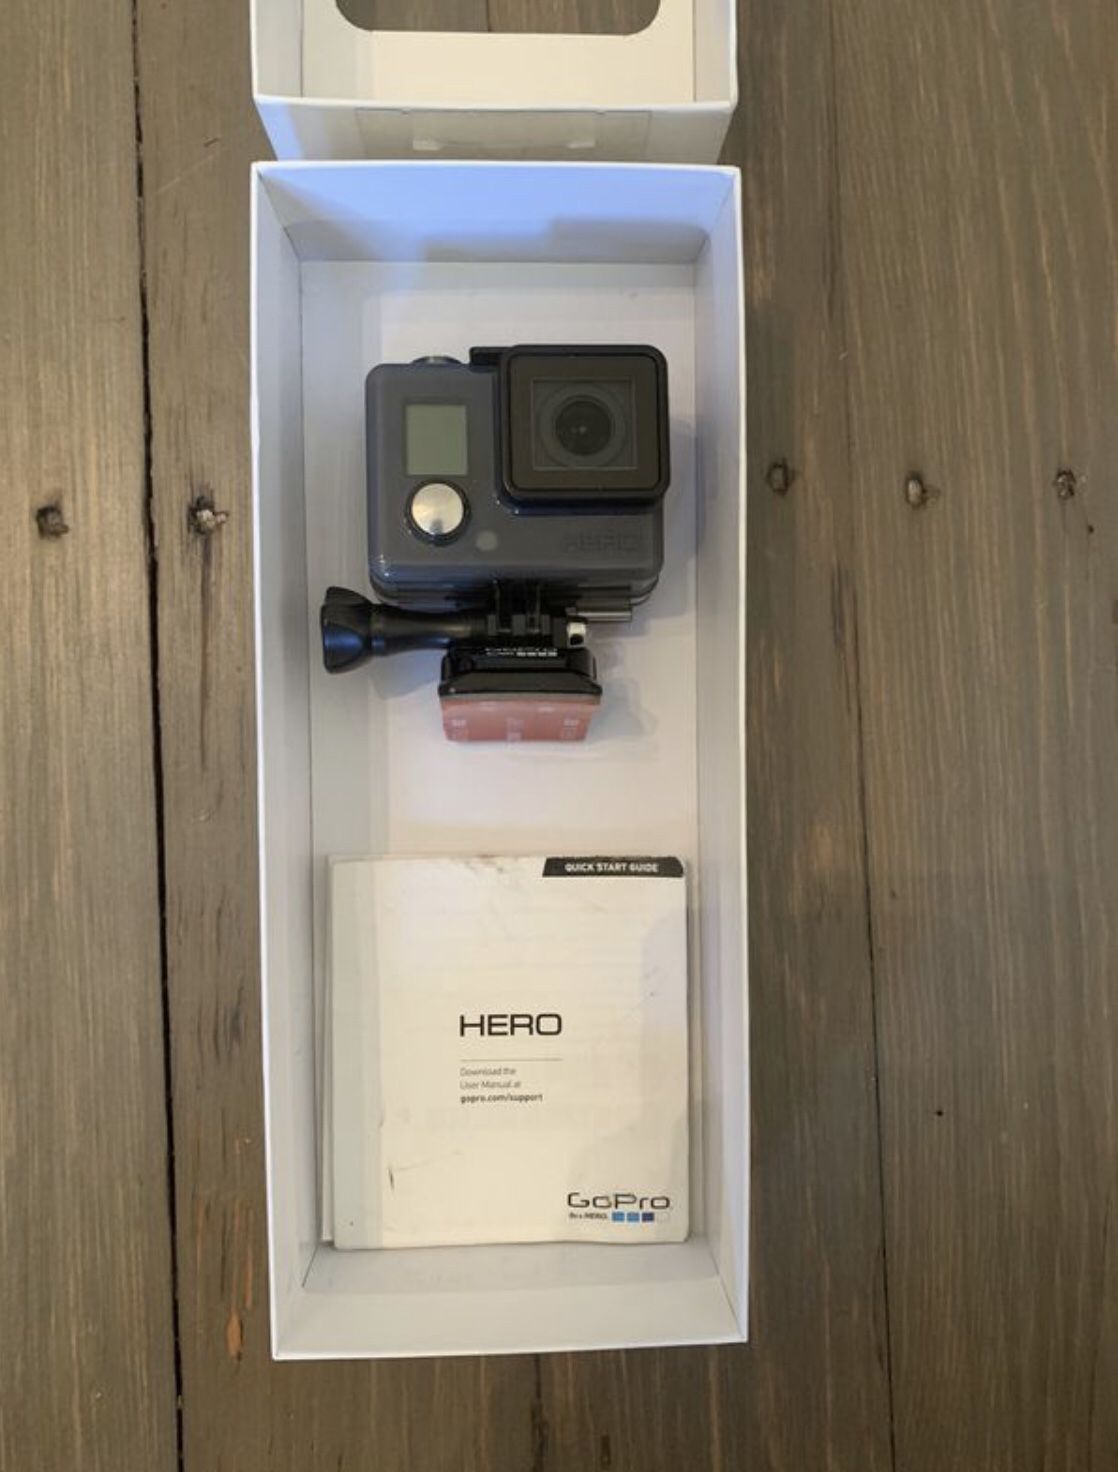 GoPro Hero Camera and accessories - never used, in box